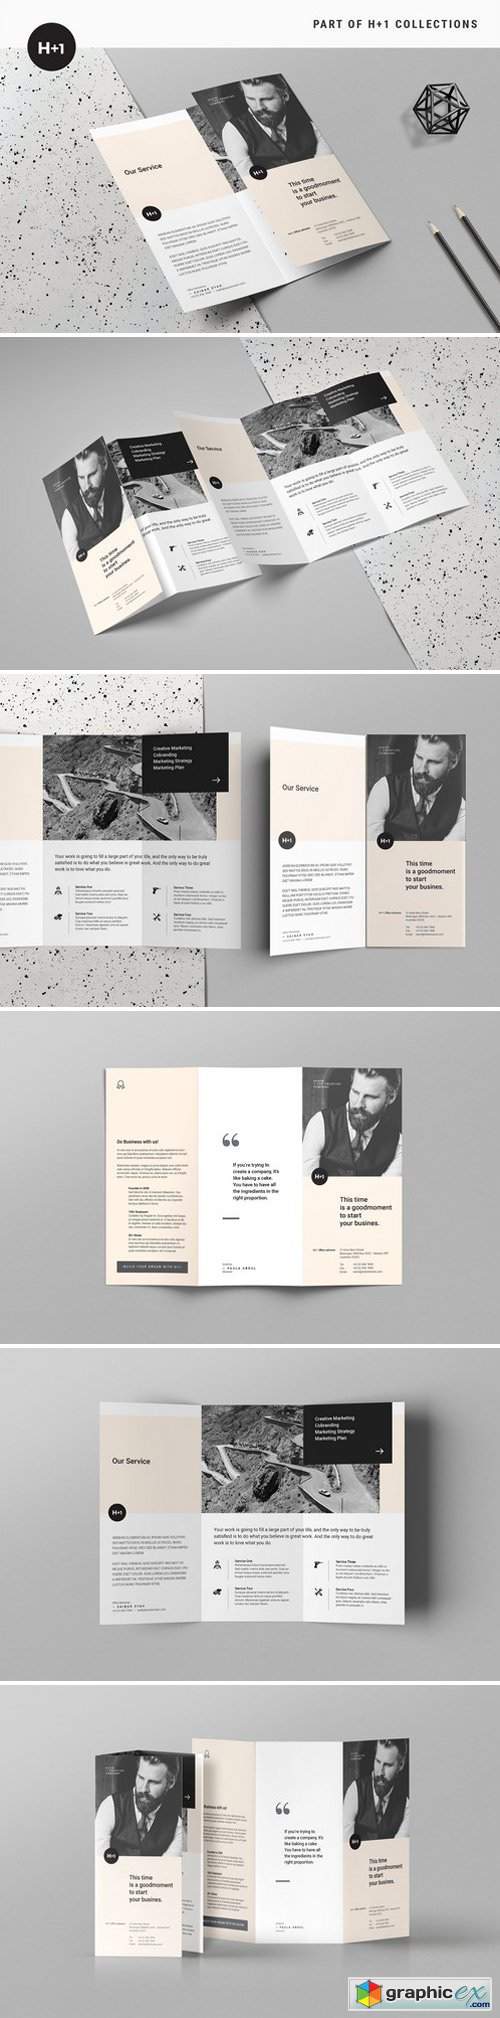 Business TriFold Brochure 2428239